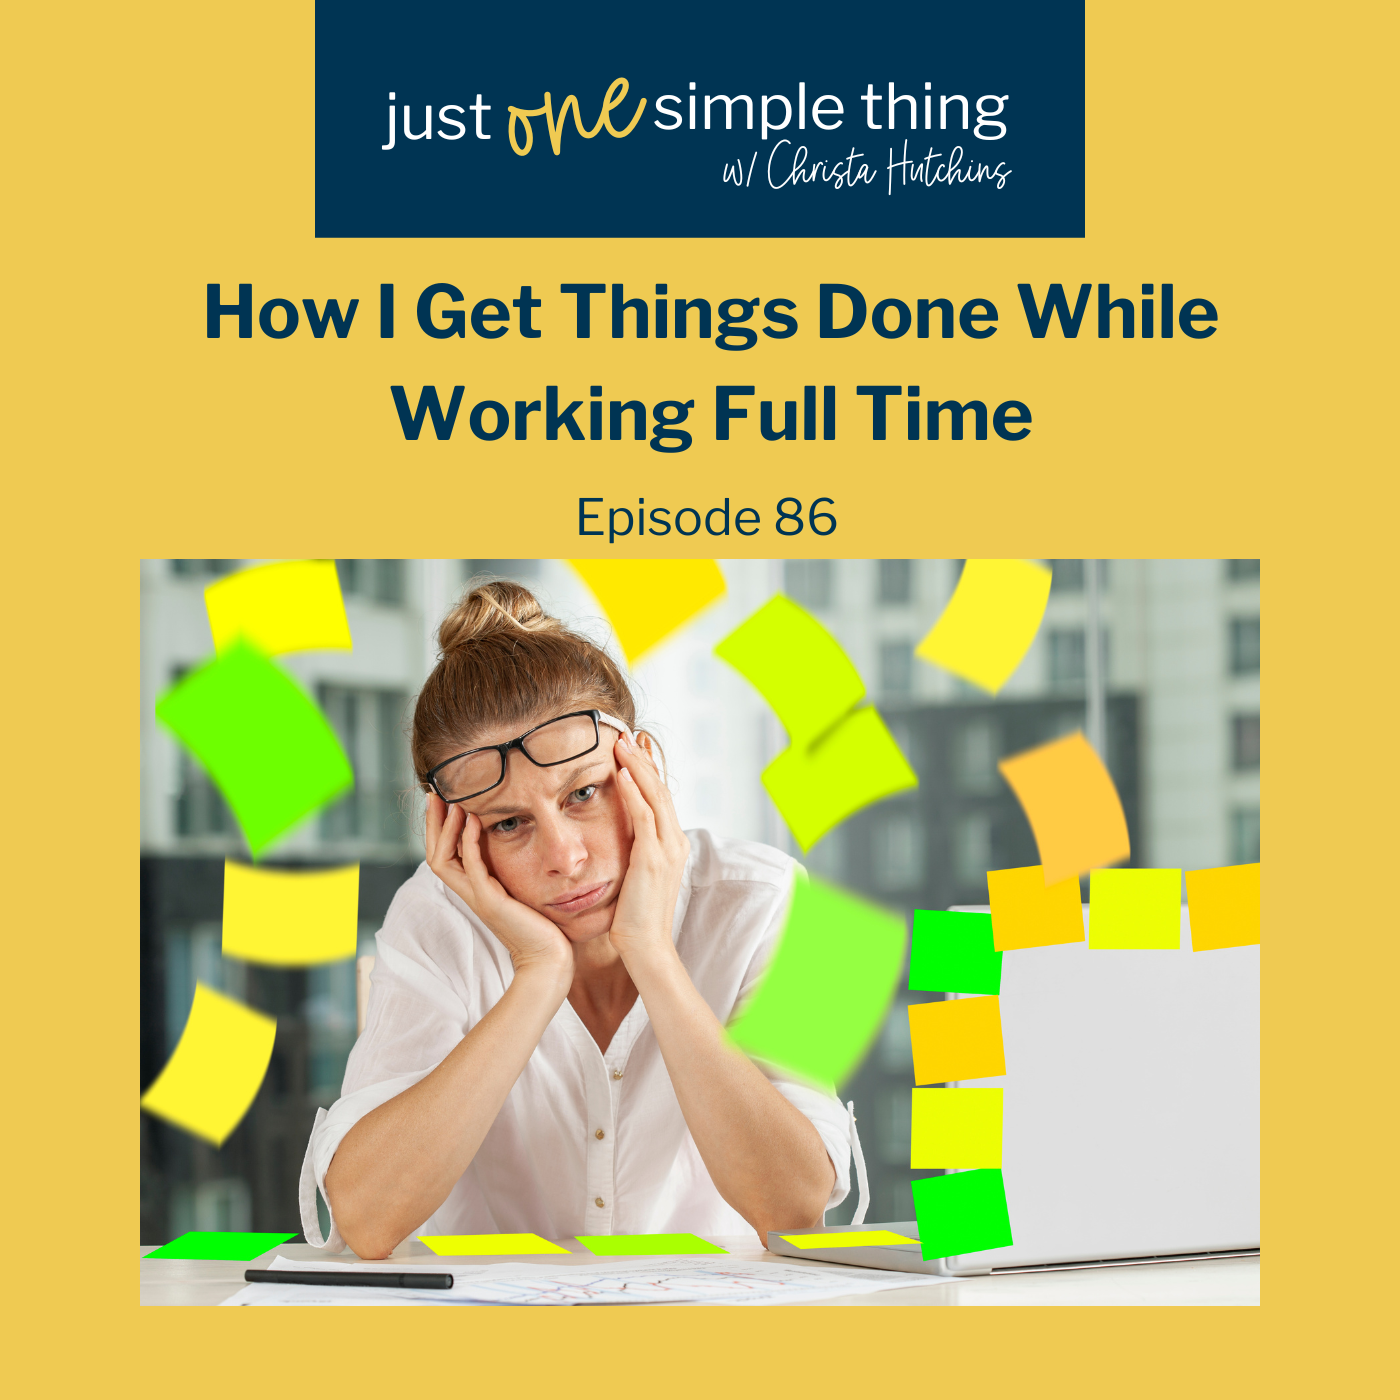 How to get things done while working full time